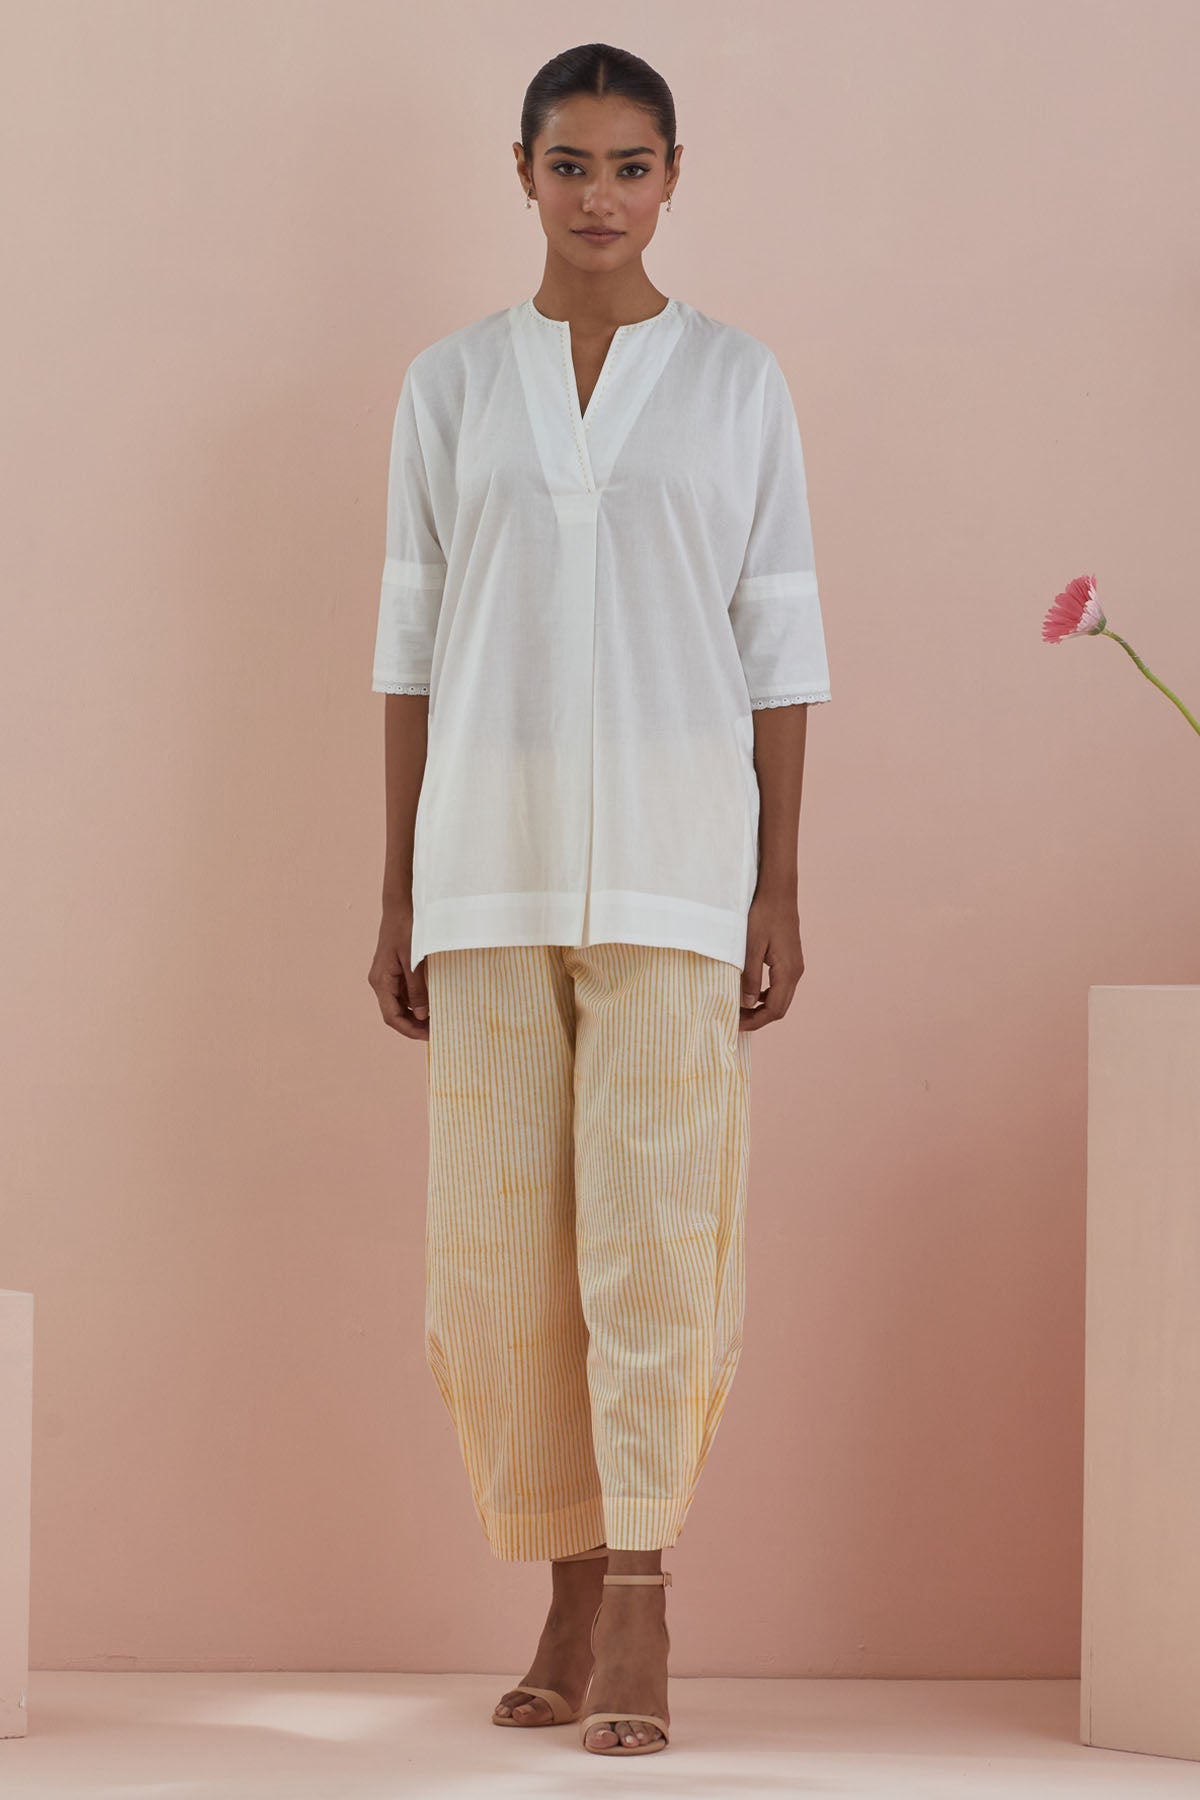 Vinusto Off-White Cotton Tunic & Pants for women online at ScrollnShops